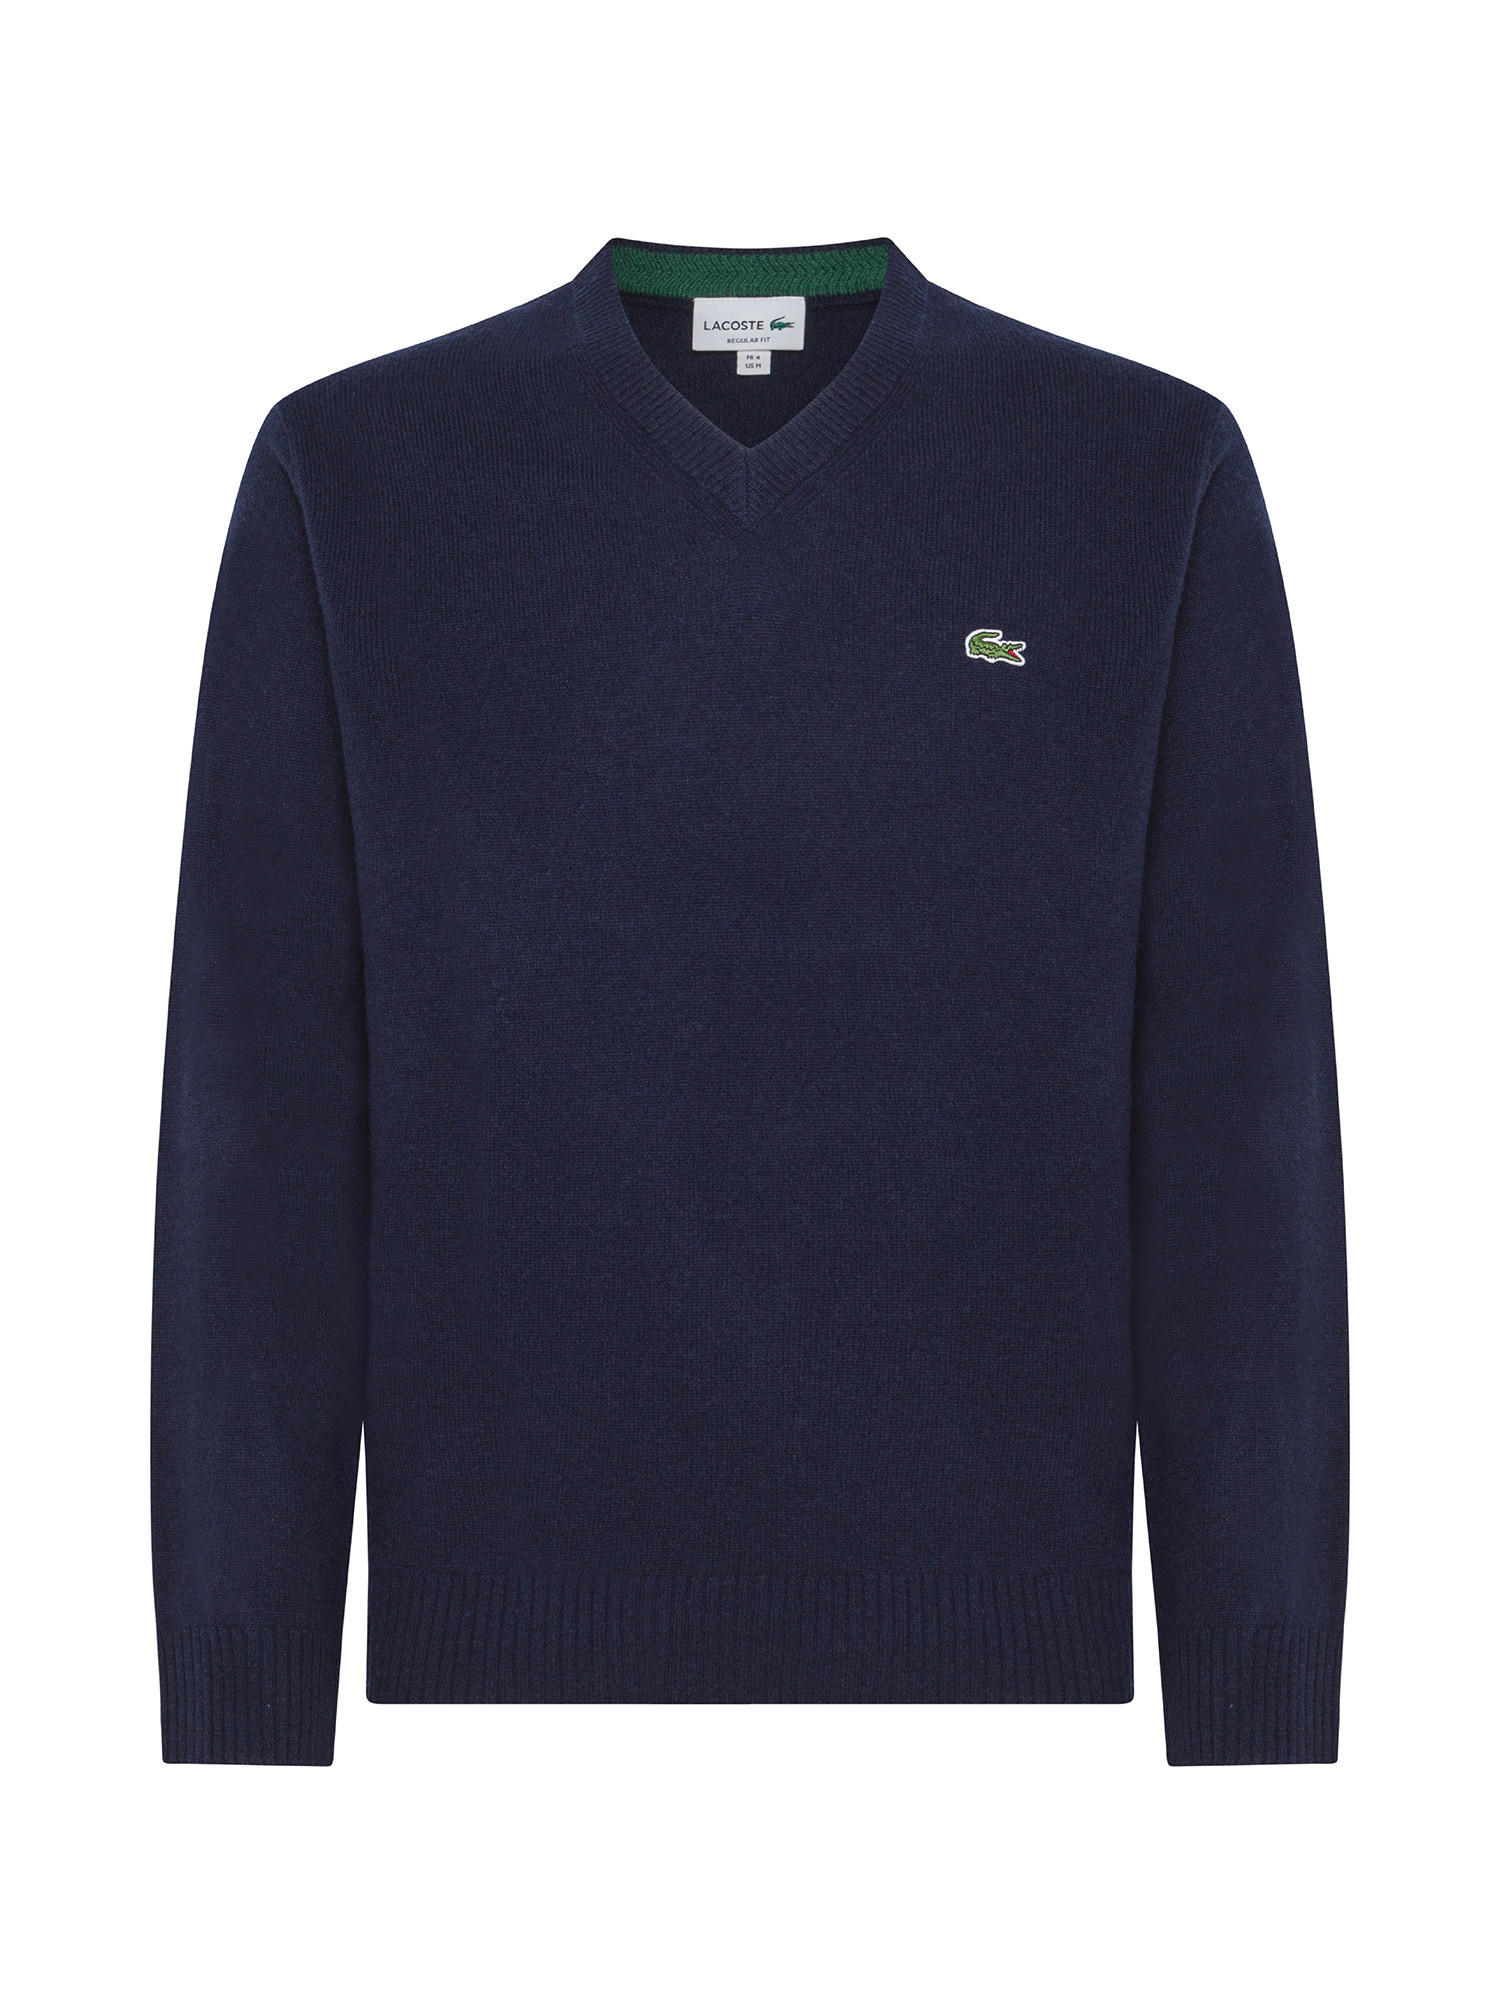 Lacoste - Pullover in lana con scollo a V, Blu, large image number 0